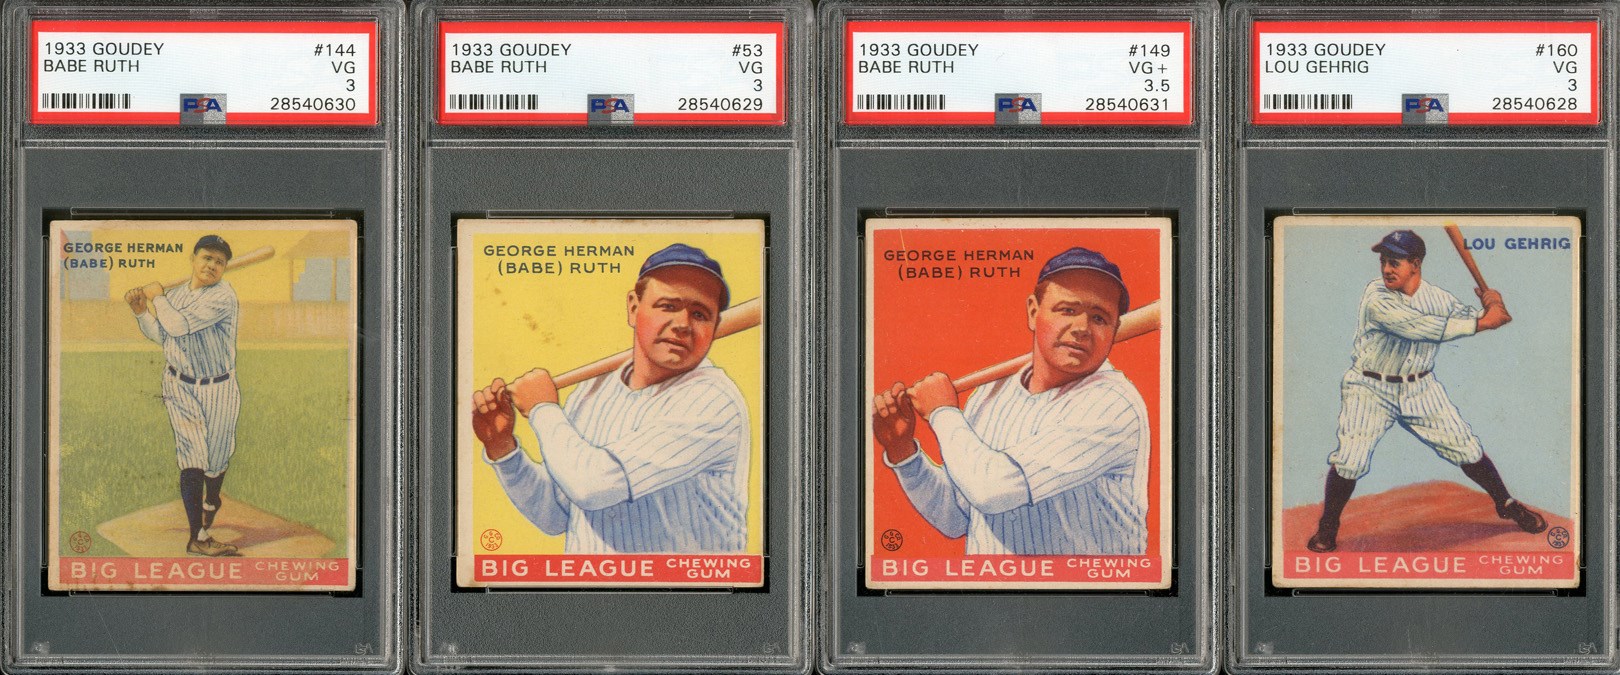 1933 Goudey Collection with Three Ruths and One Gehrig